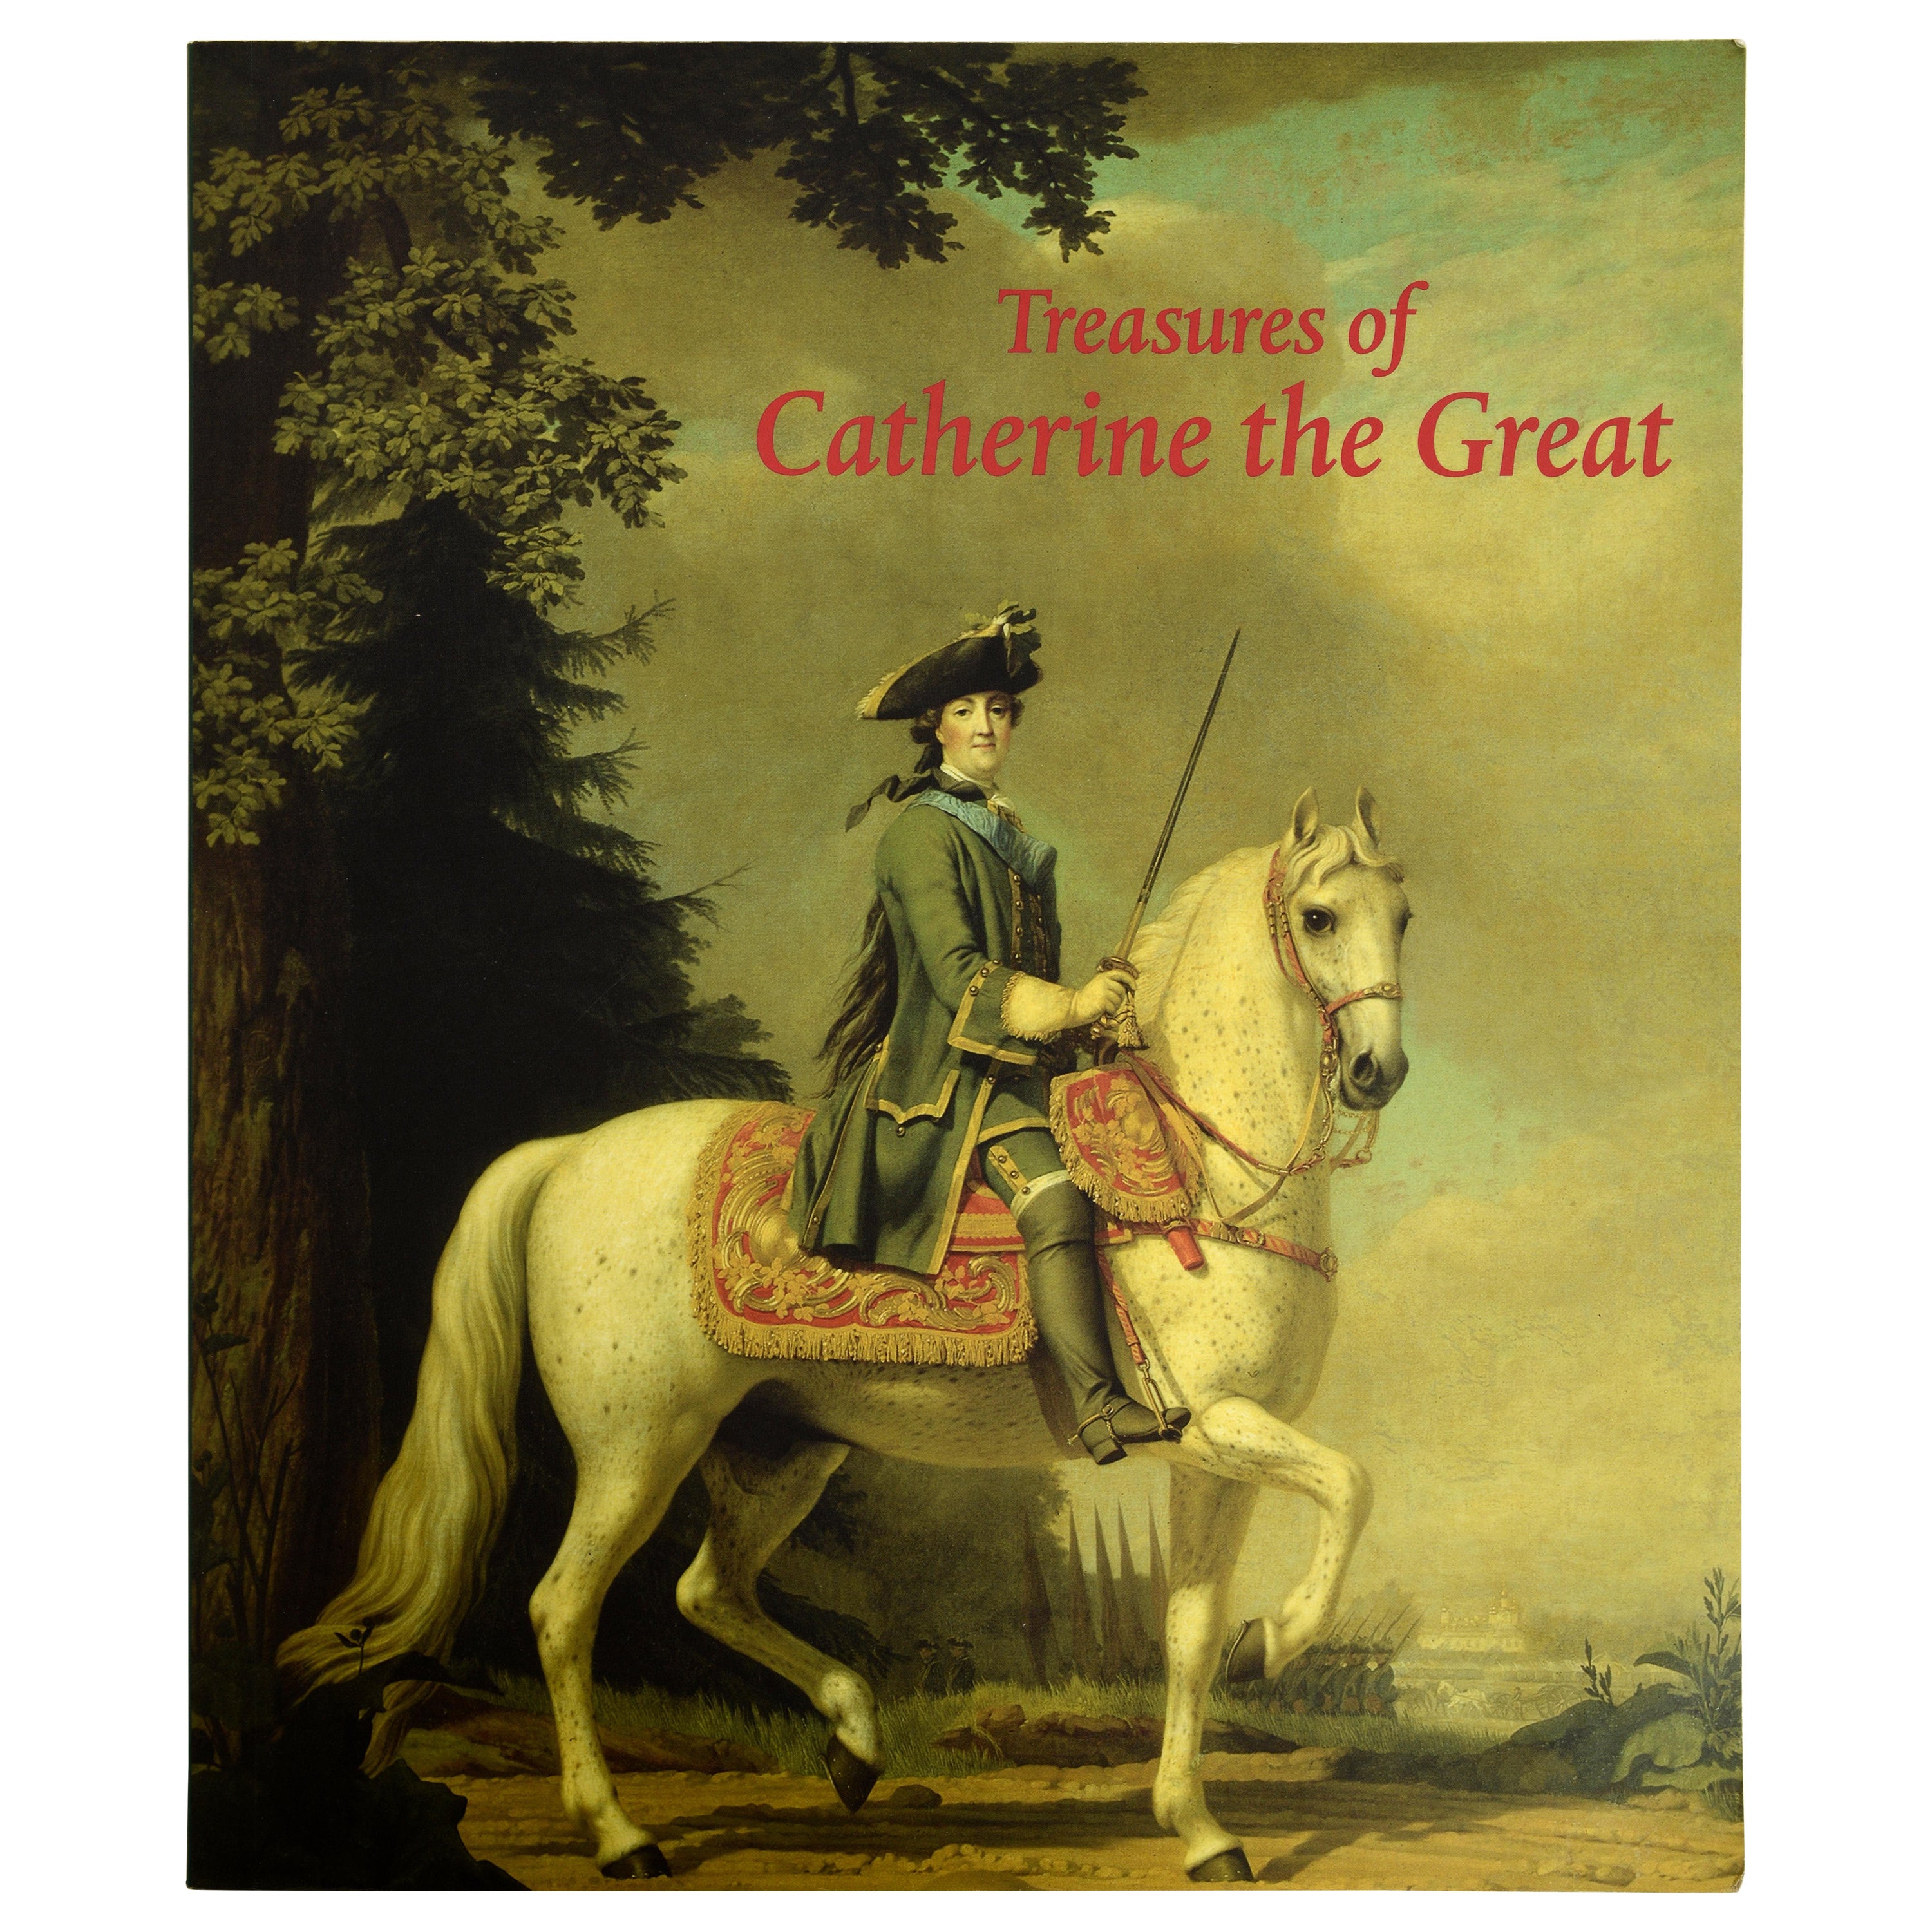 Treasures of Catherine the Great, 1st Ed Exhibition Catalog